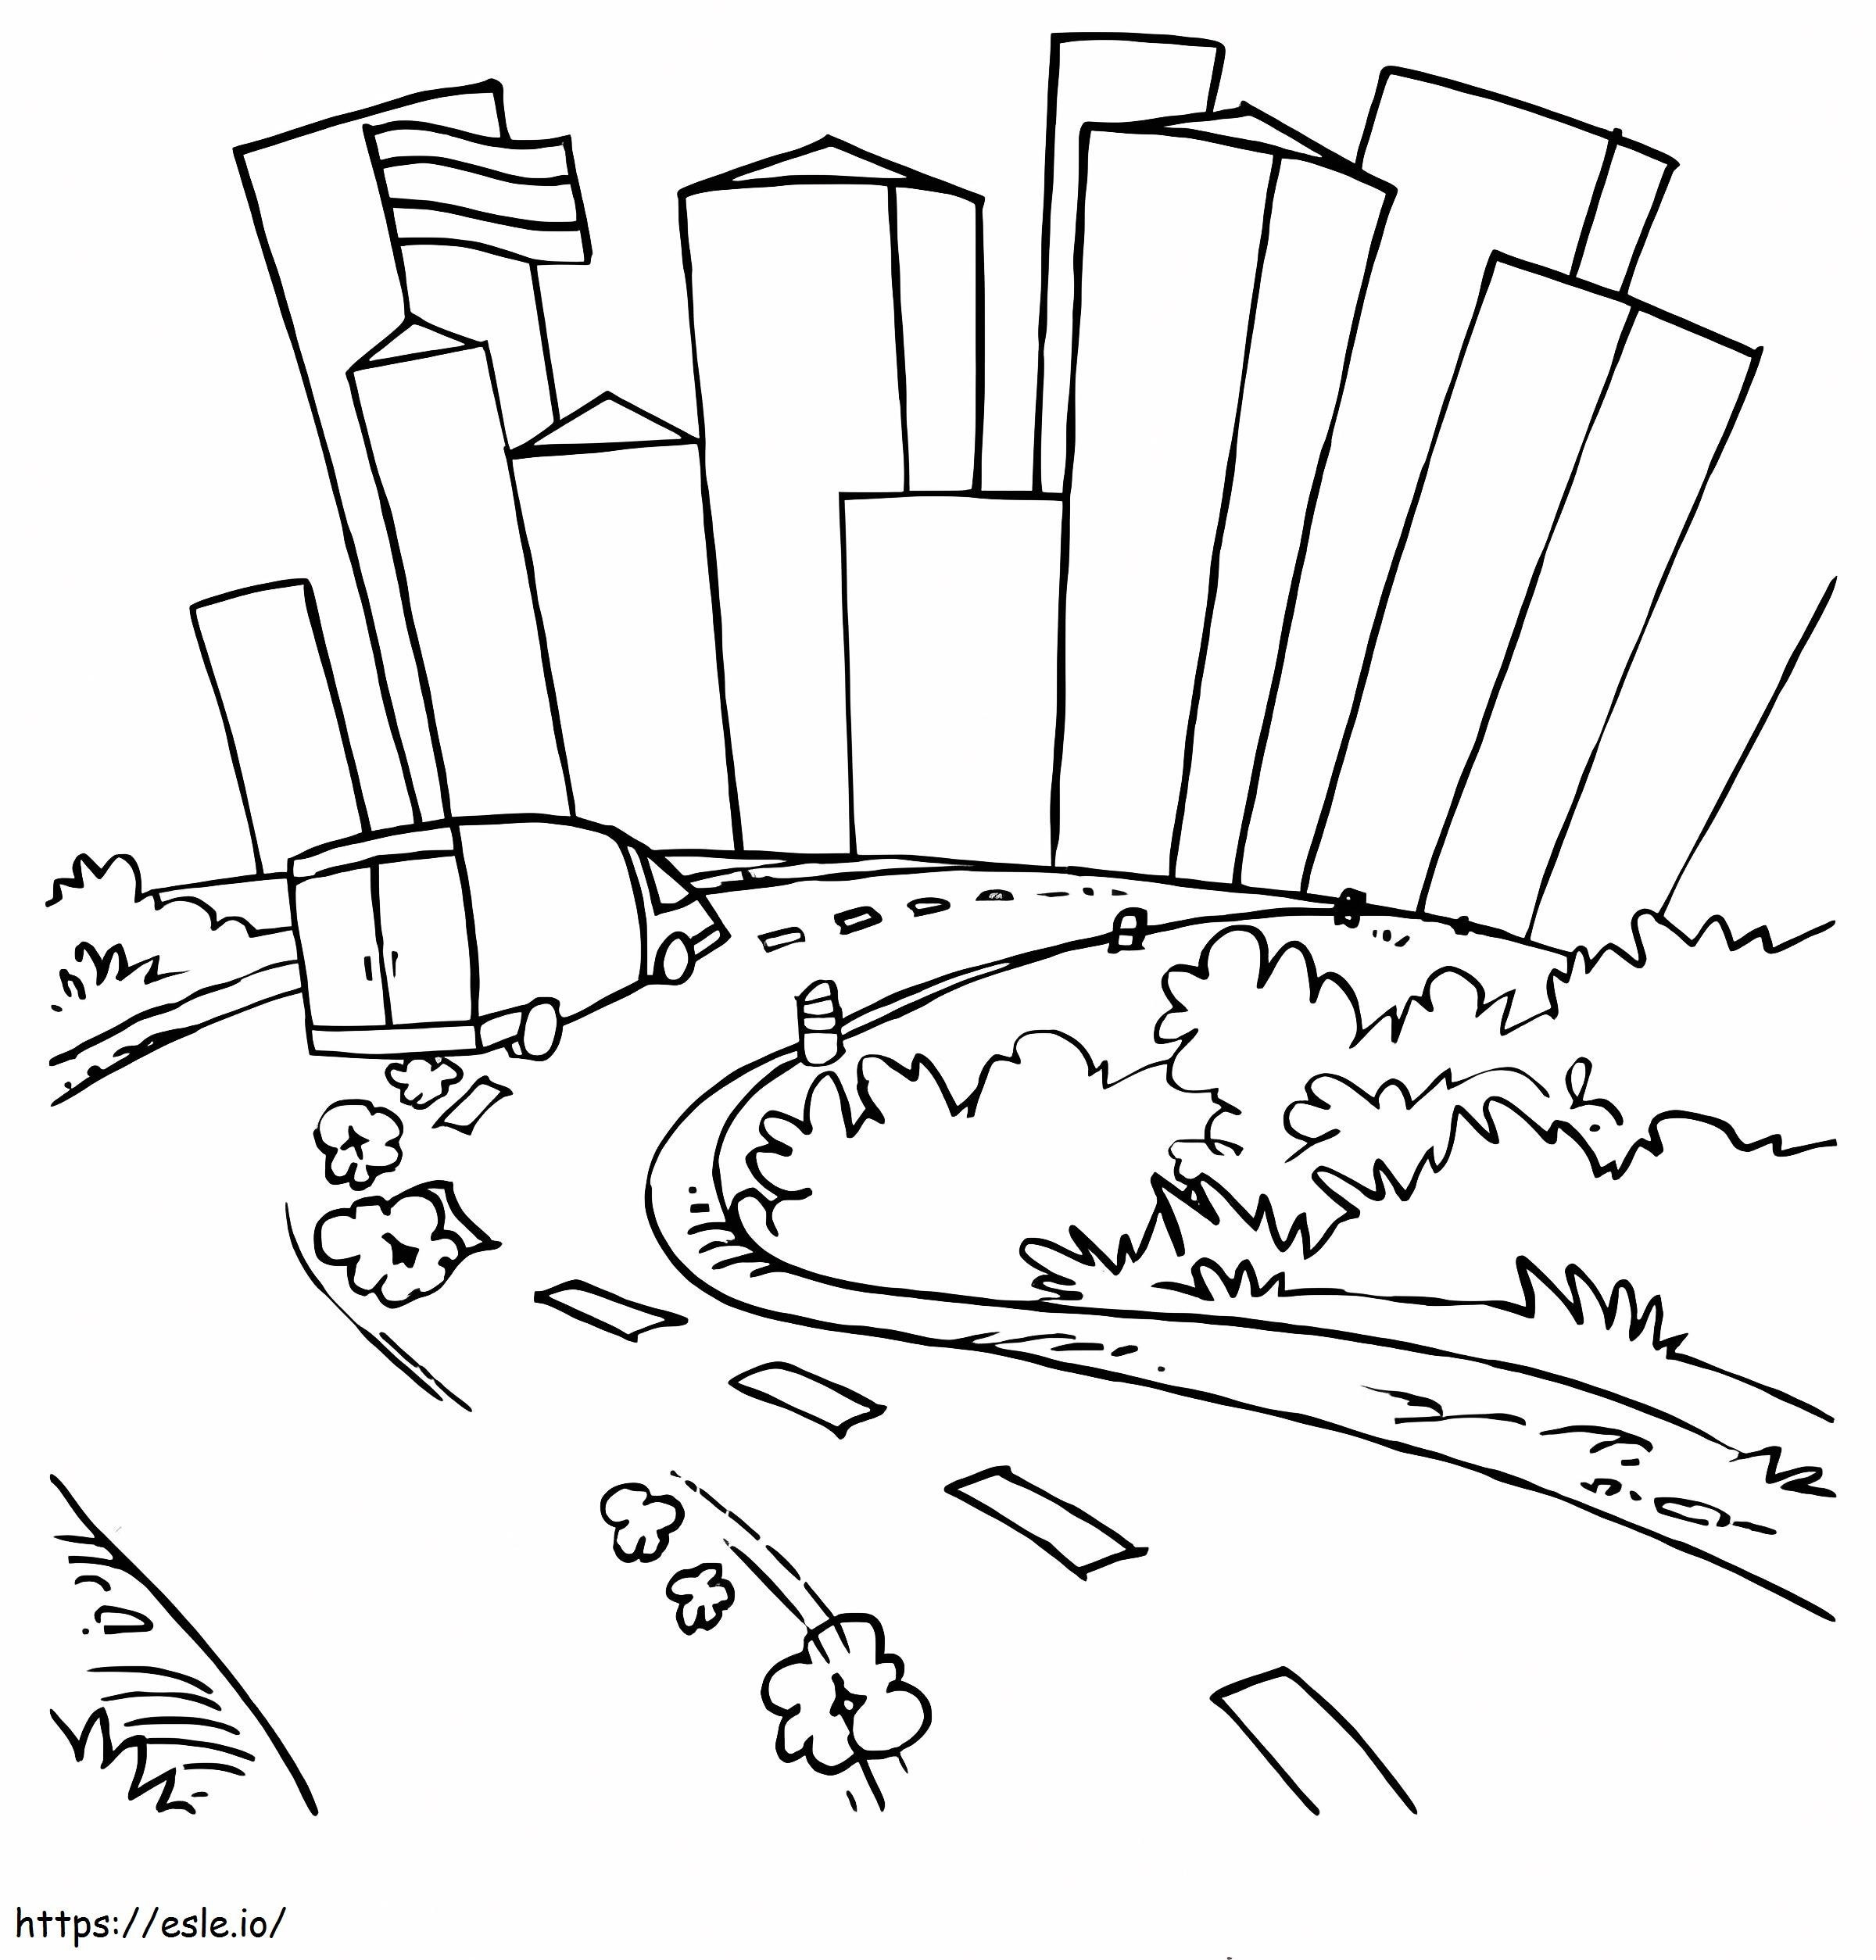 Simple Path coloring page